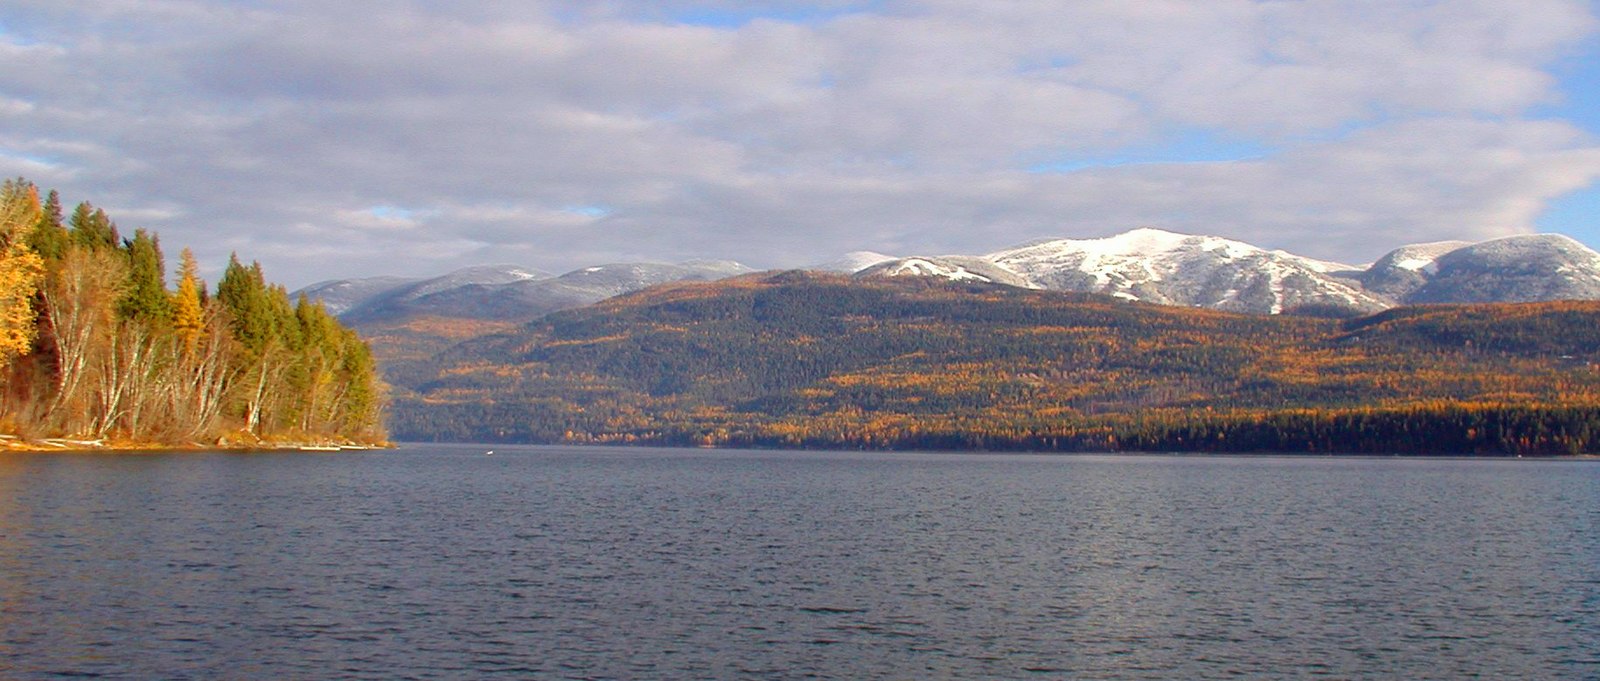 A large deep blue lake with hills and mountains in the backgroundPicture